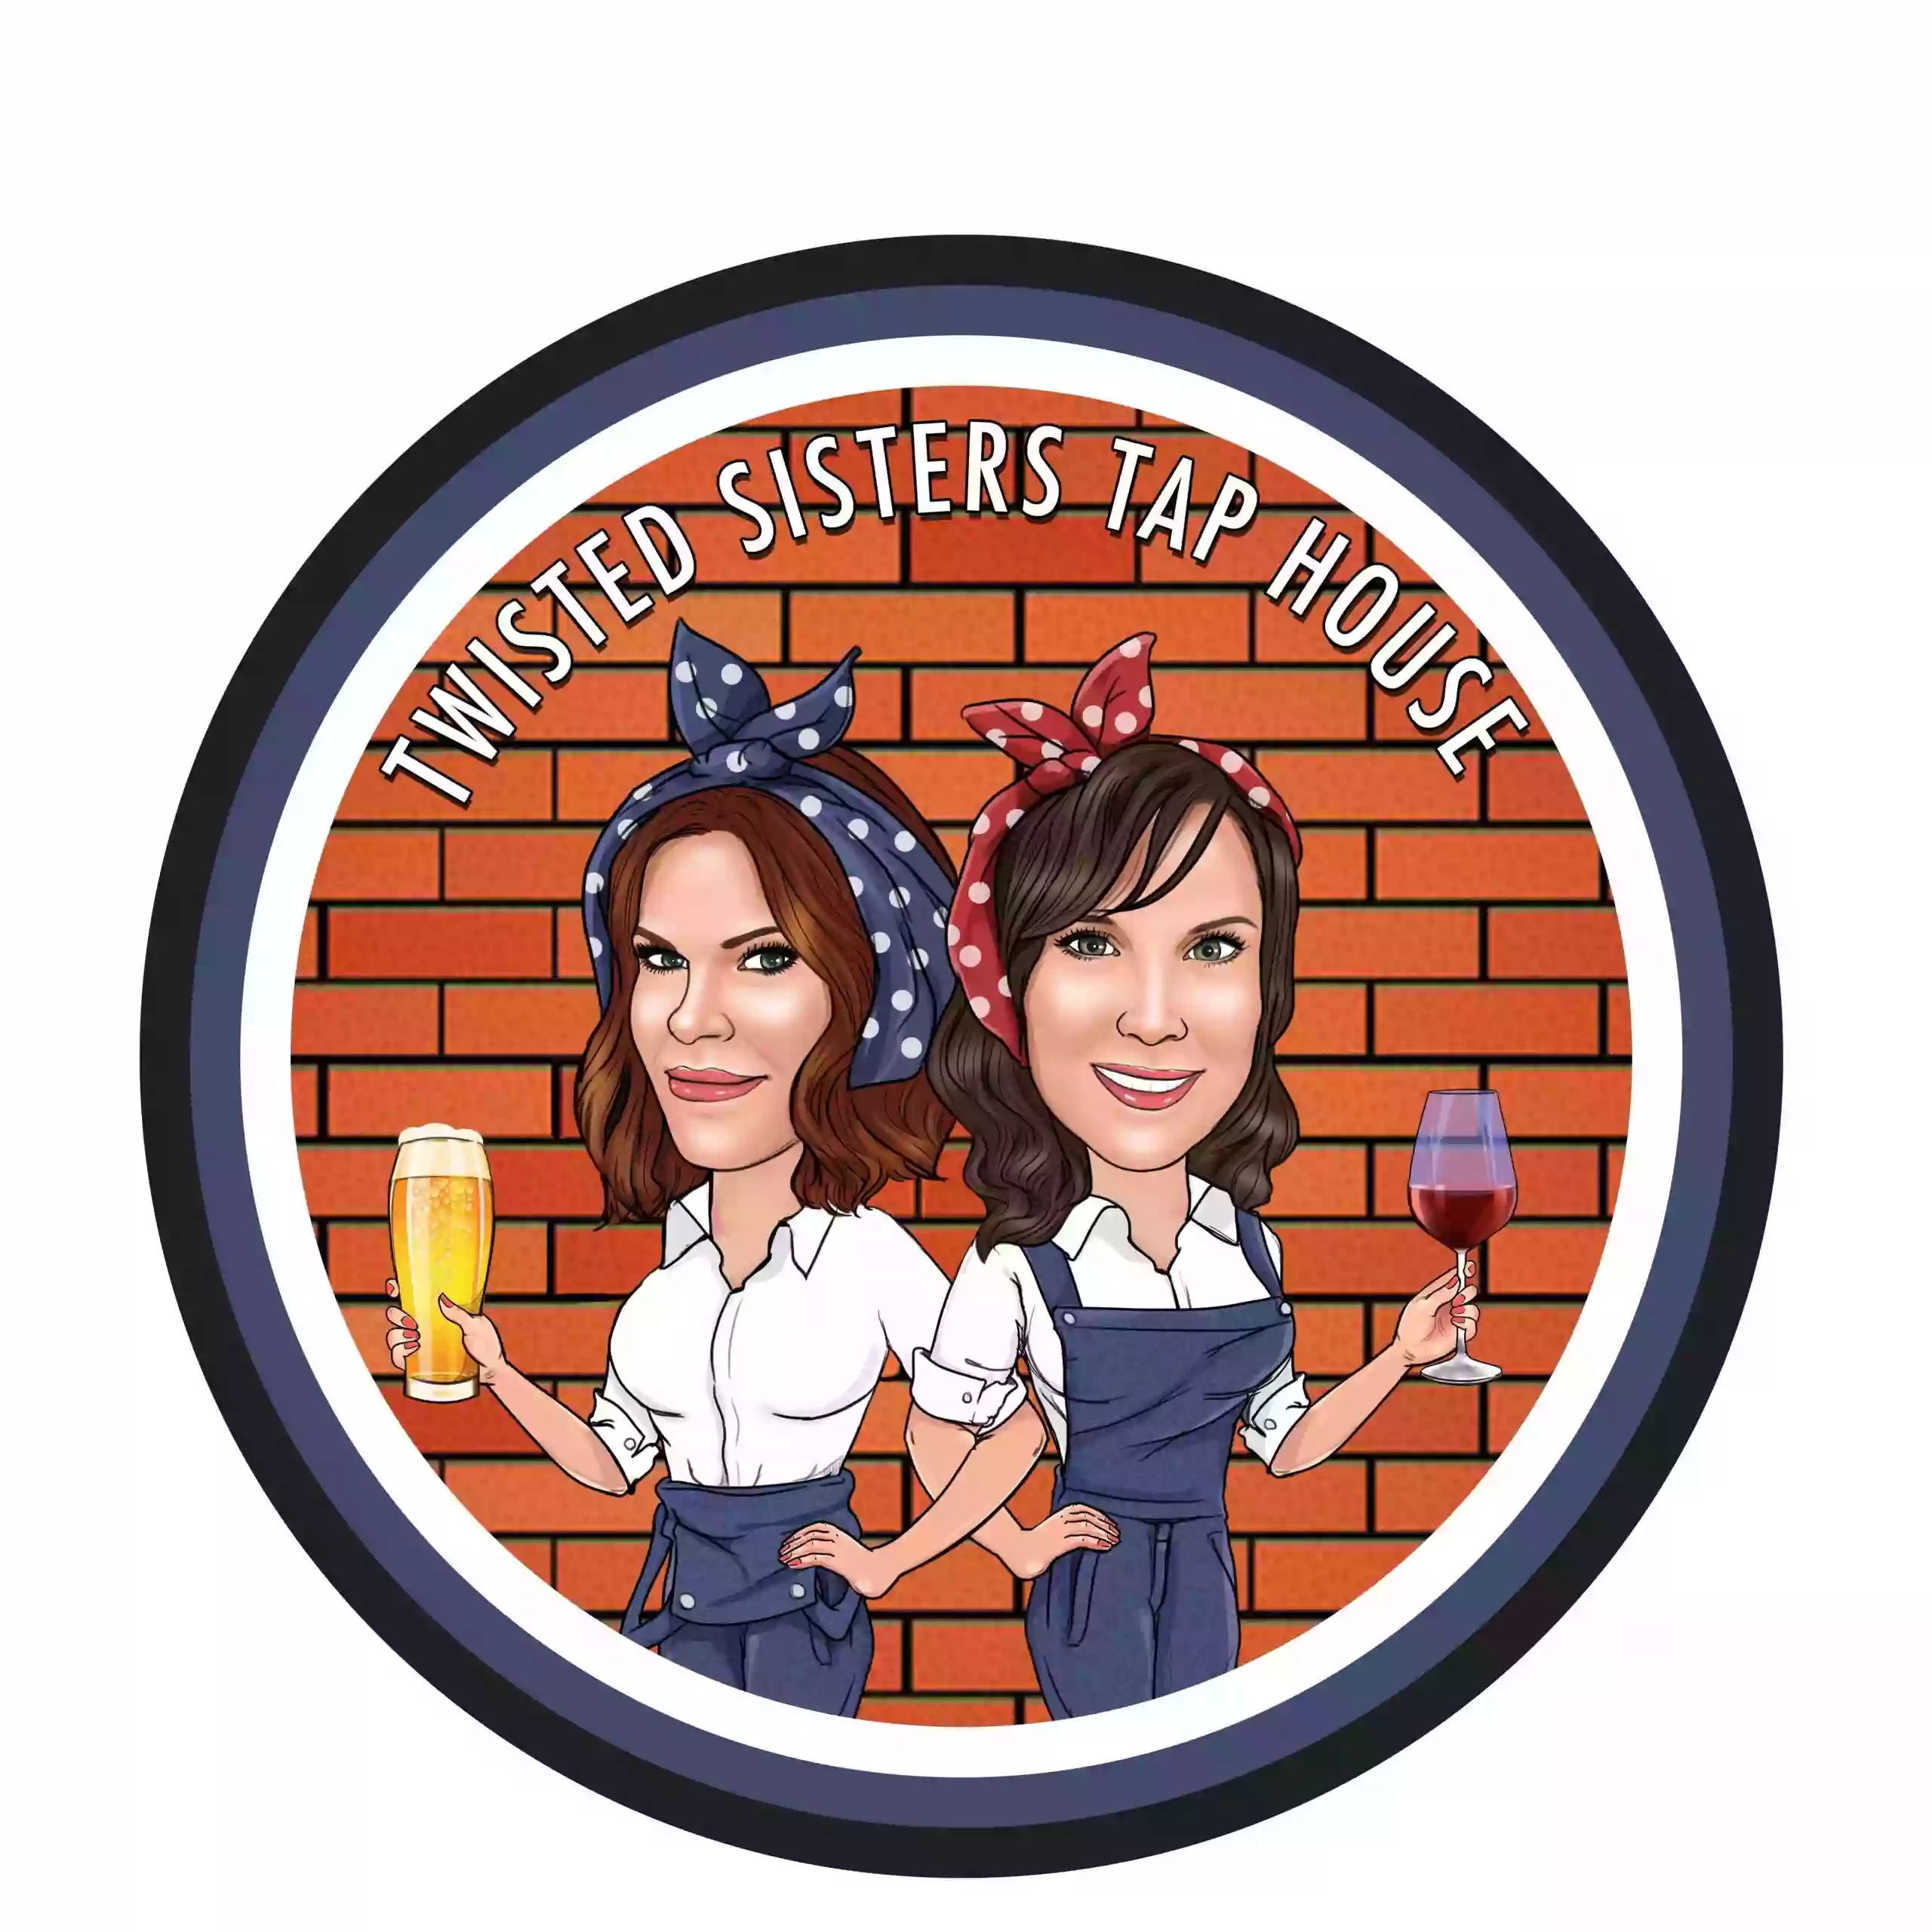 Twisted Sisters Tap House